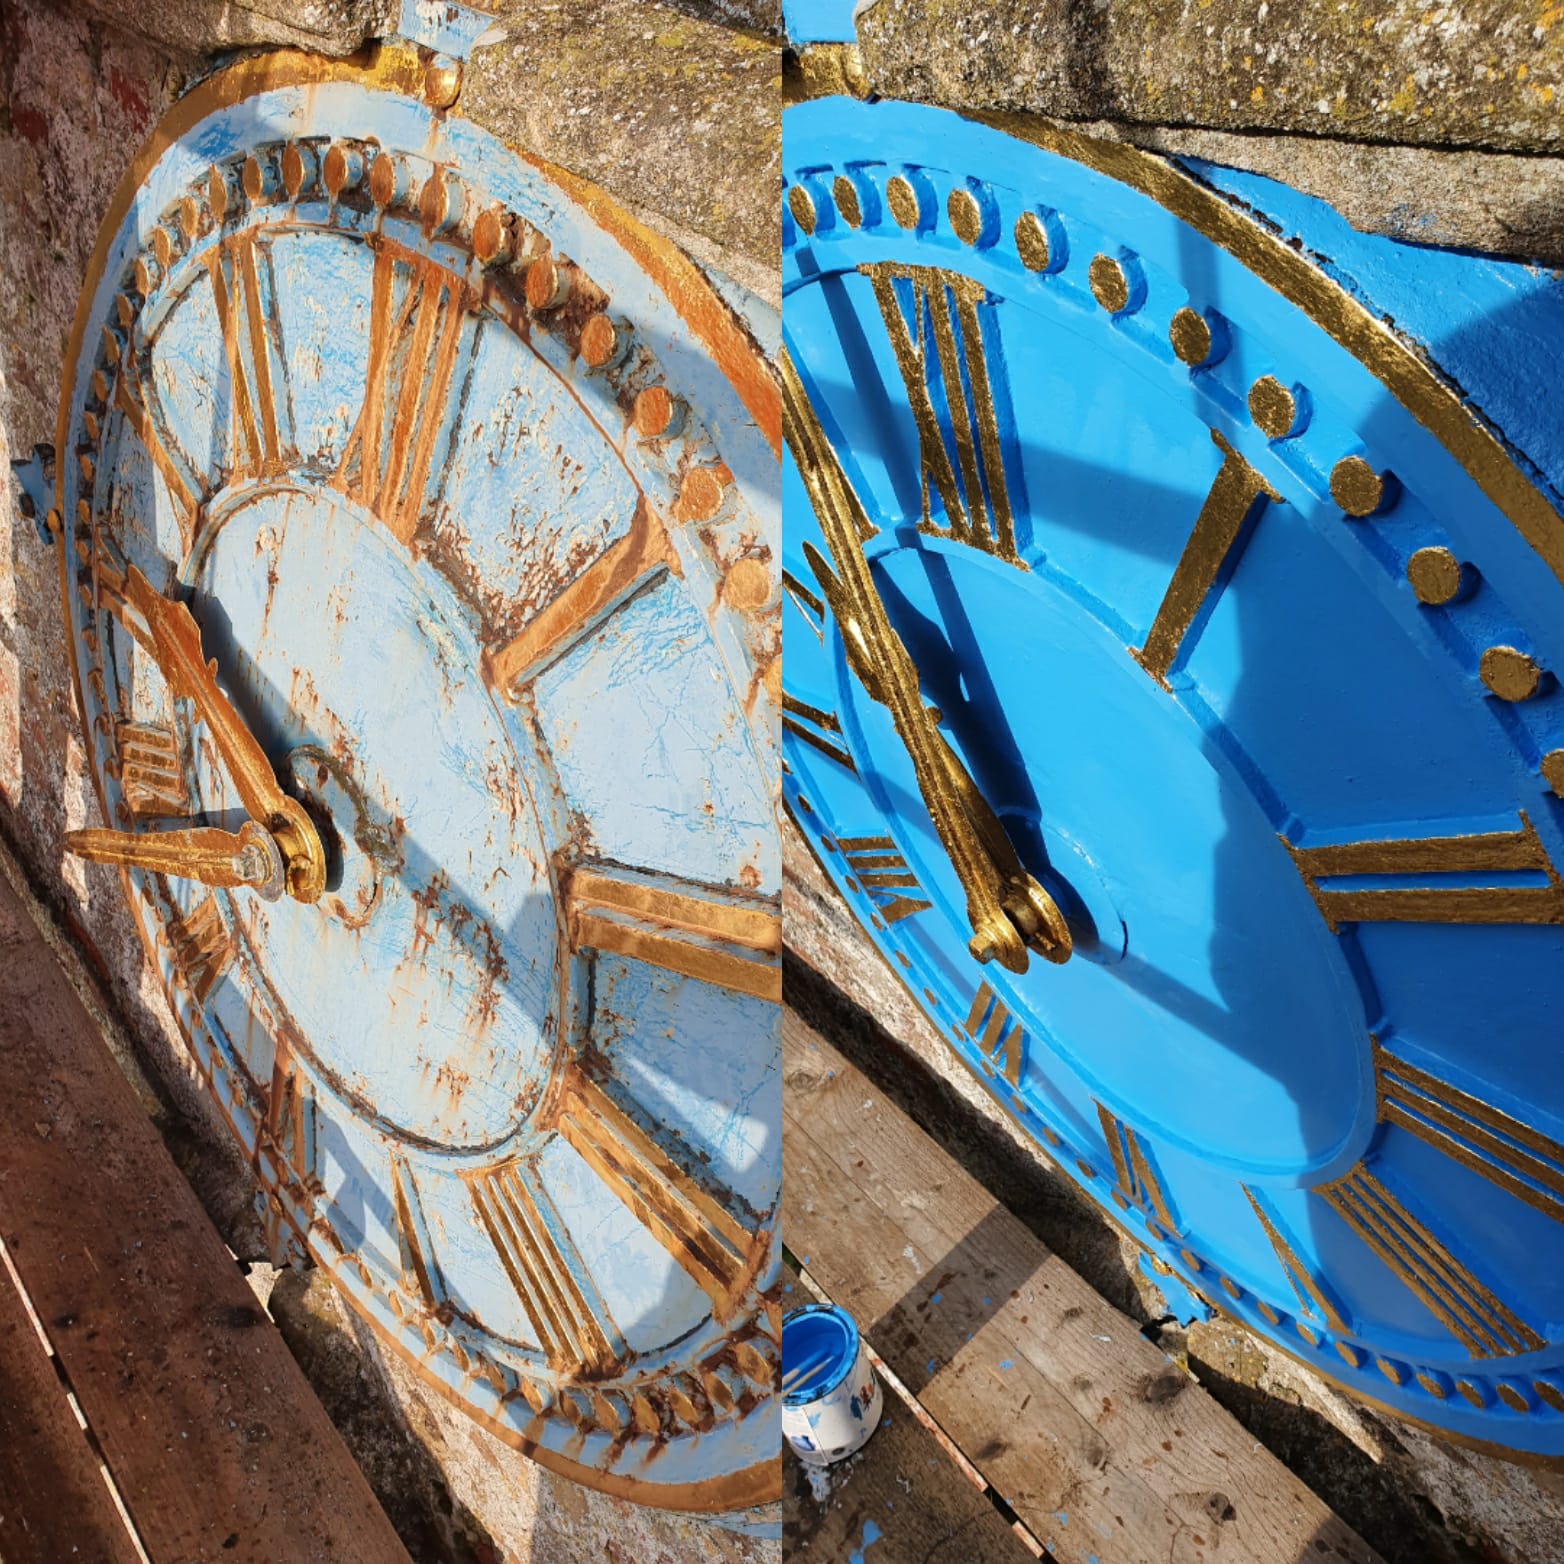 Photograph of clock face before and after work